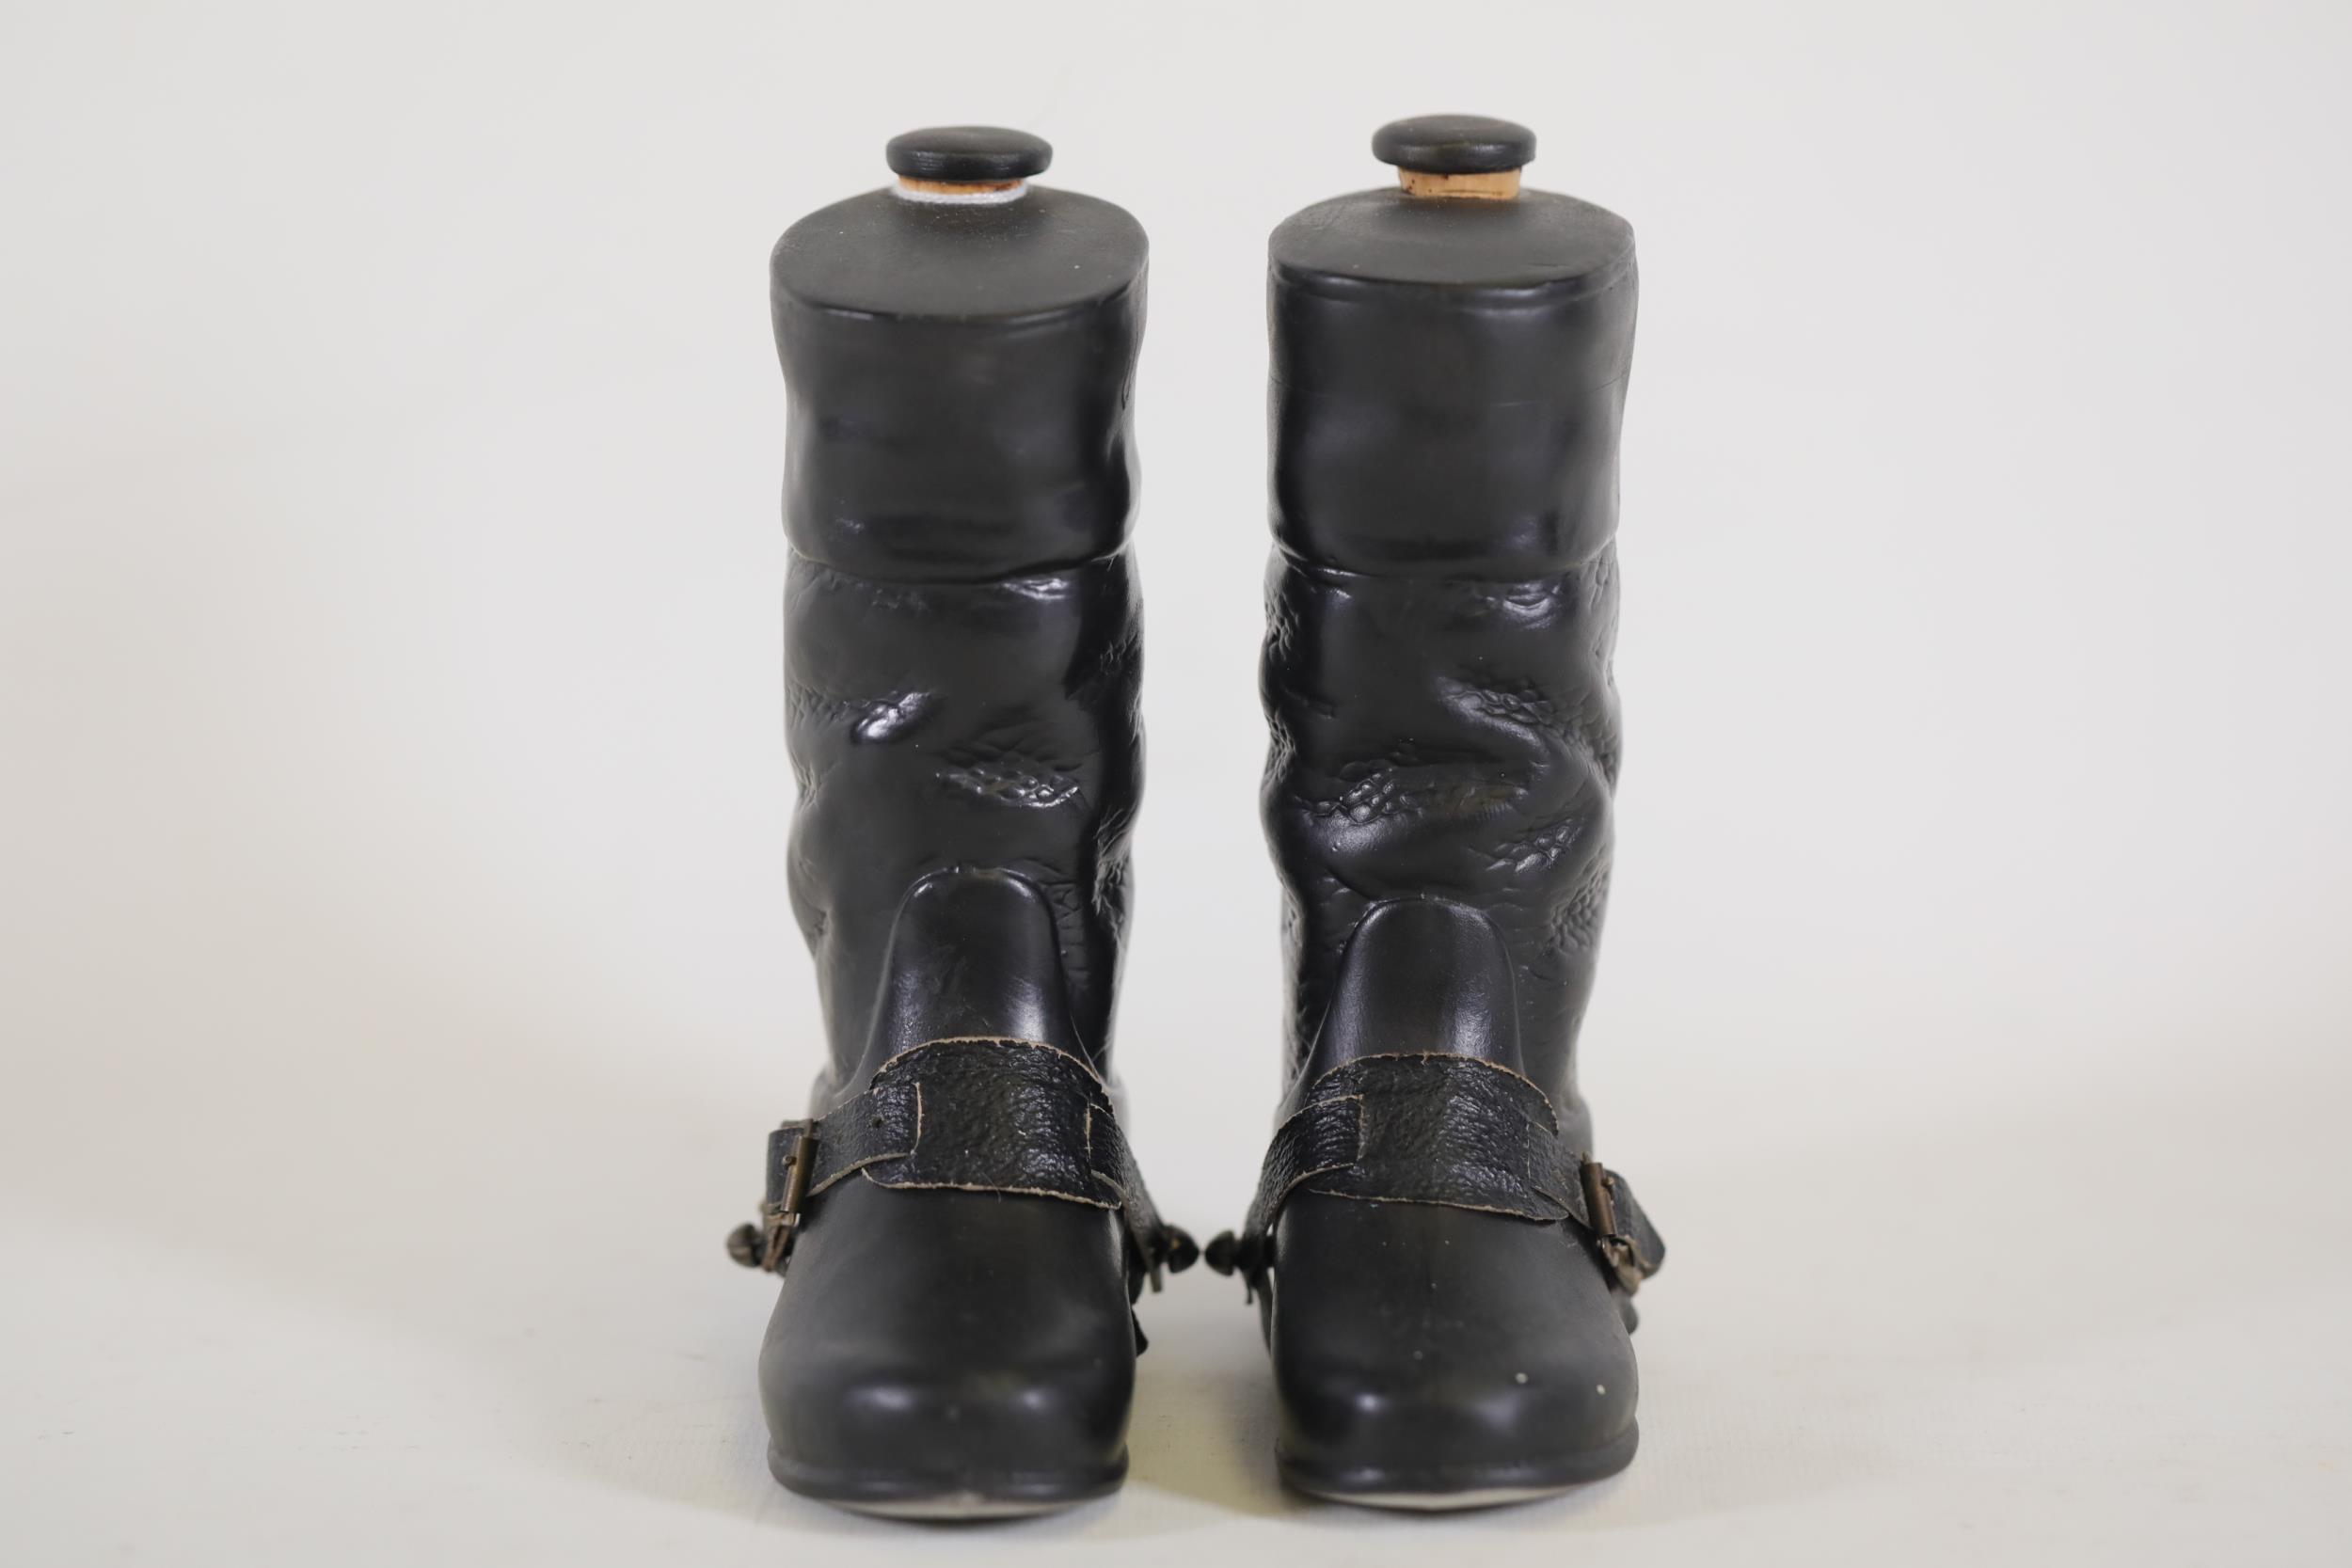 A Pair of ceramic hip flasks in the shape of riding boots - Image 8 of 8